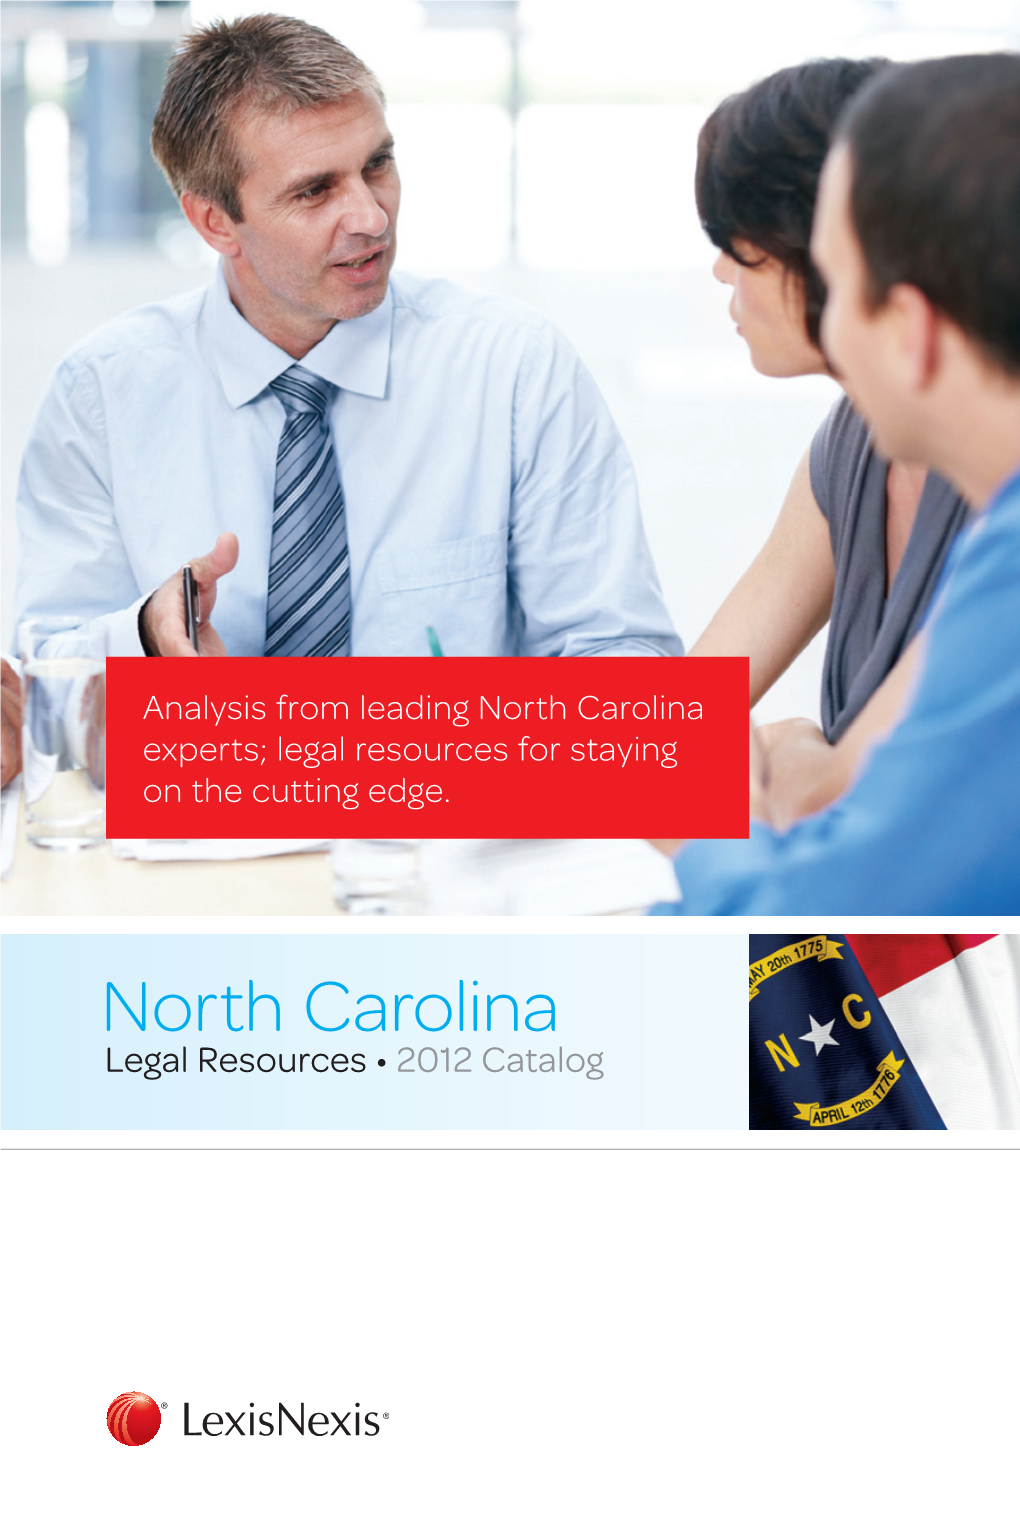 North Carolina Experts; Legal Resources for Staying on the Cutting Edge